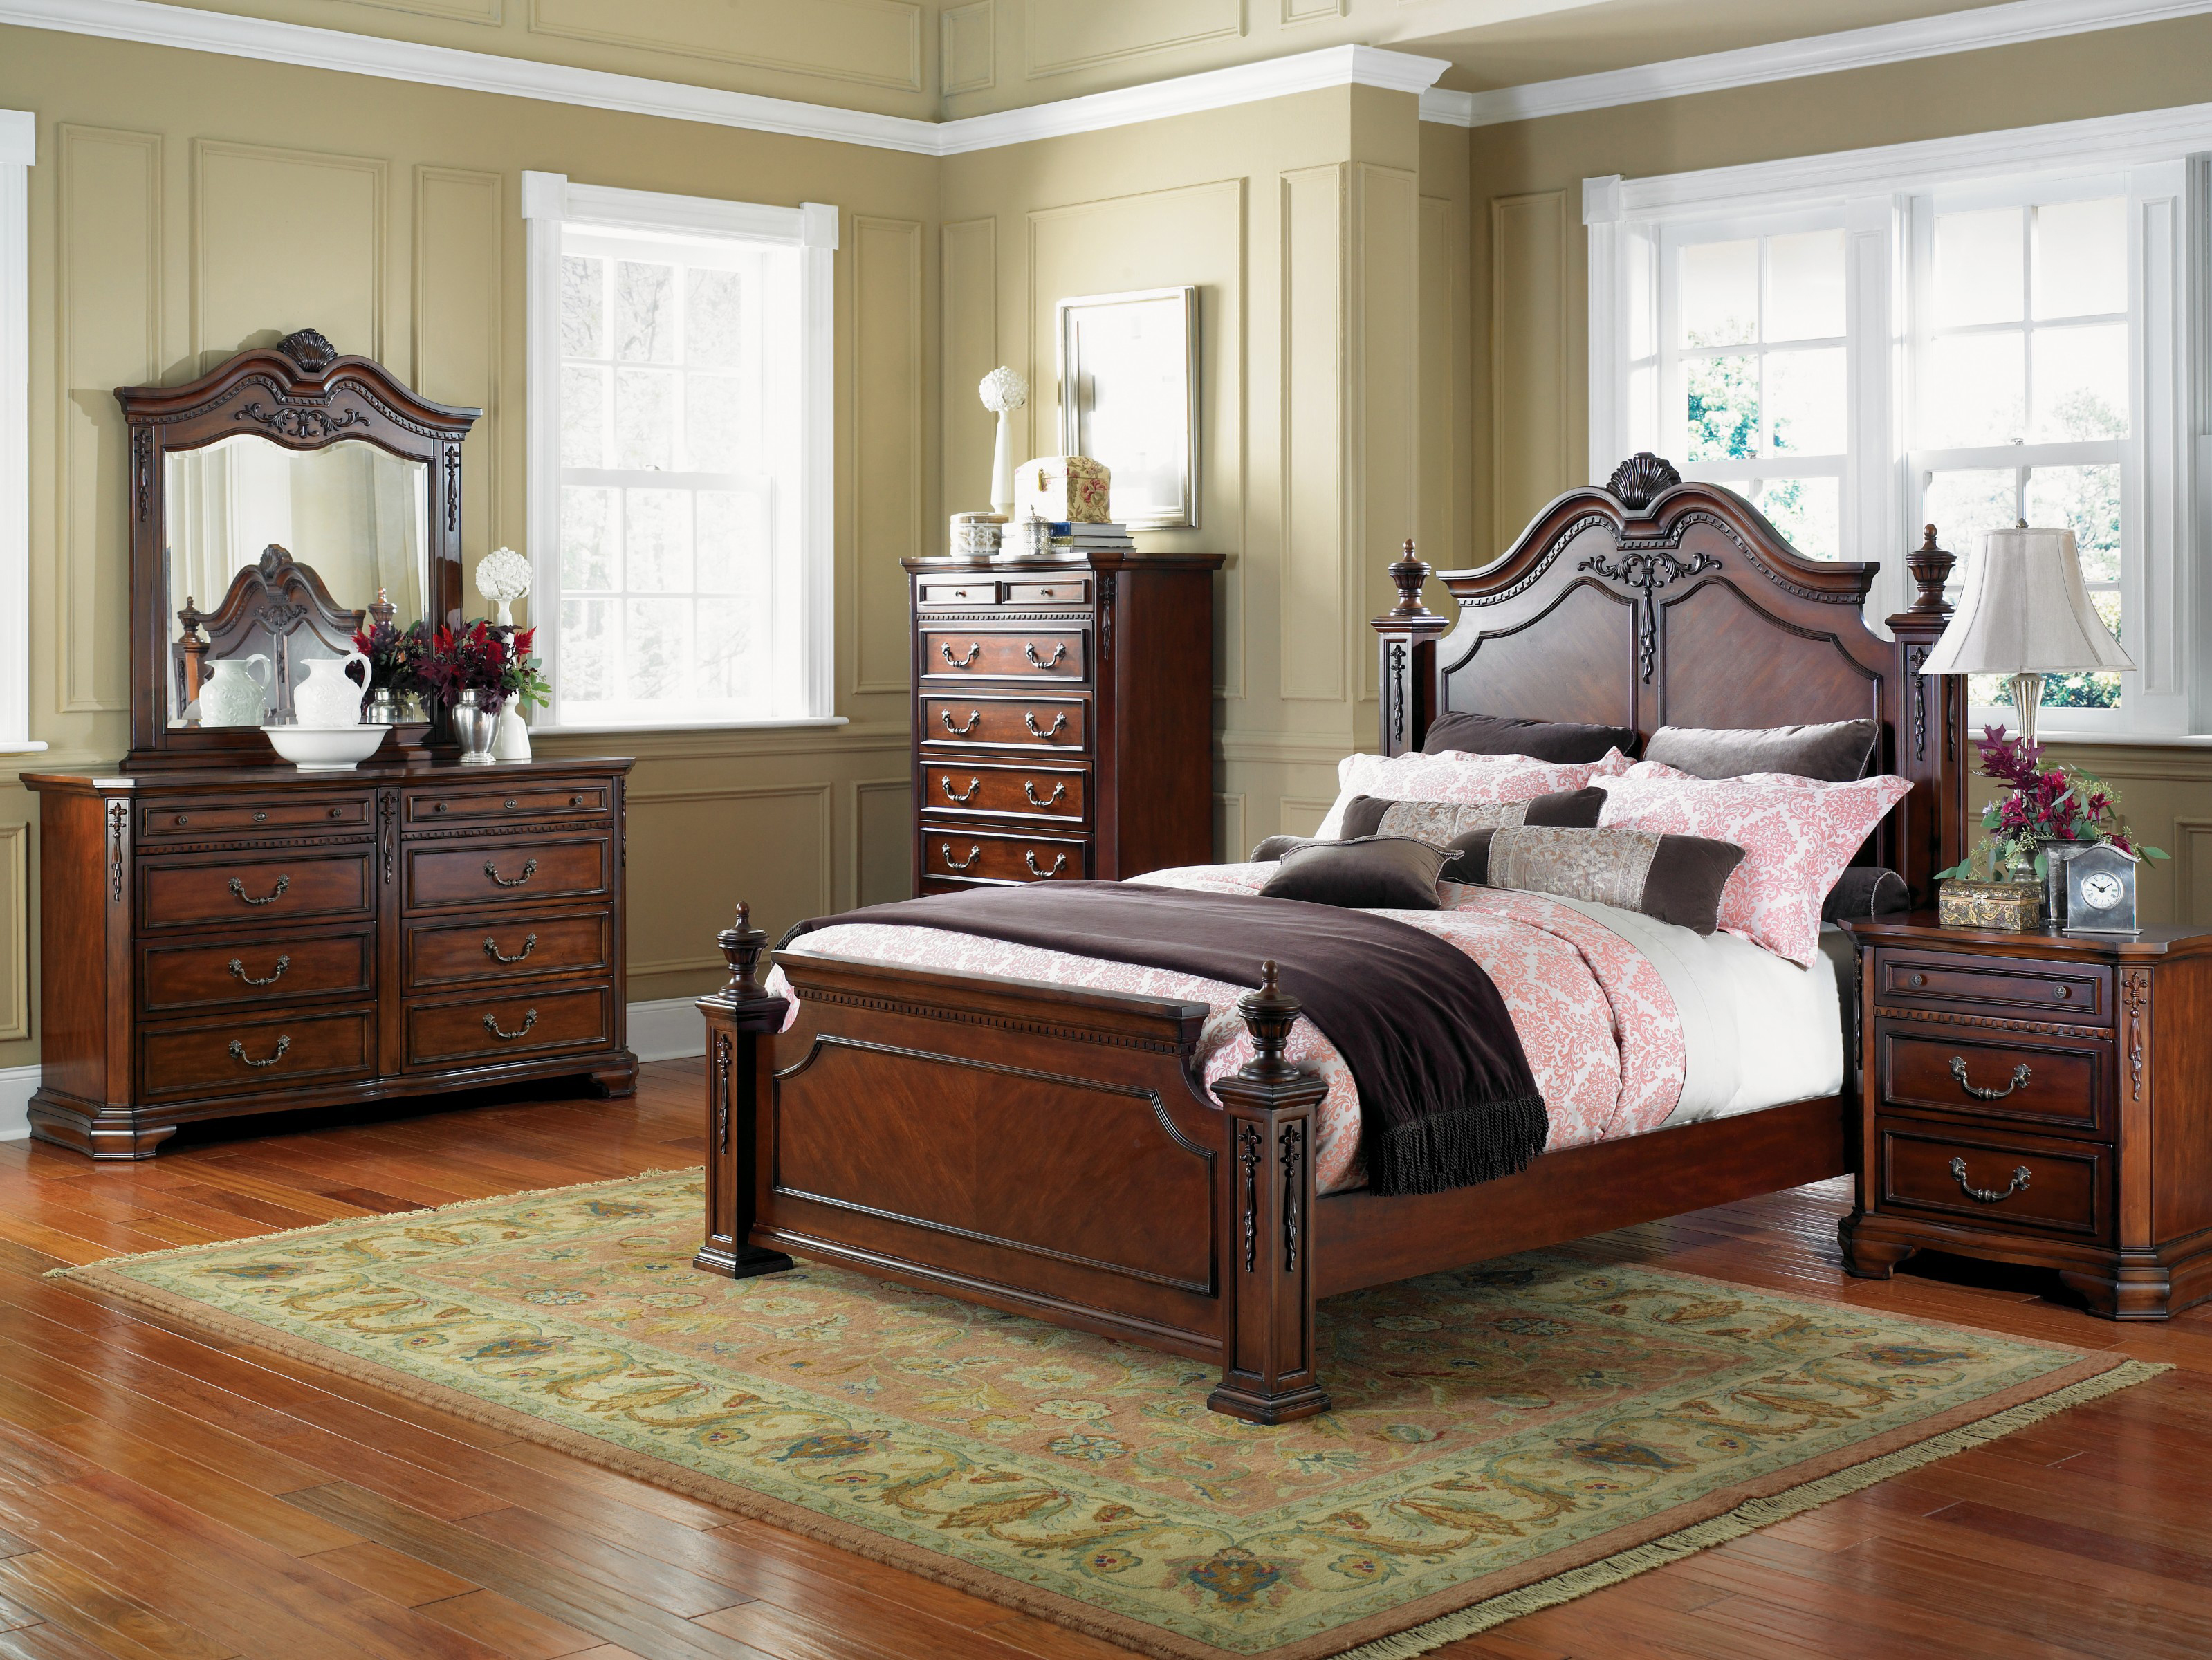 Excelsior Bedroom Furniture Set Collection  Request a FREE Quote